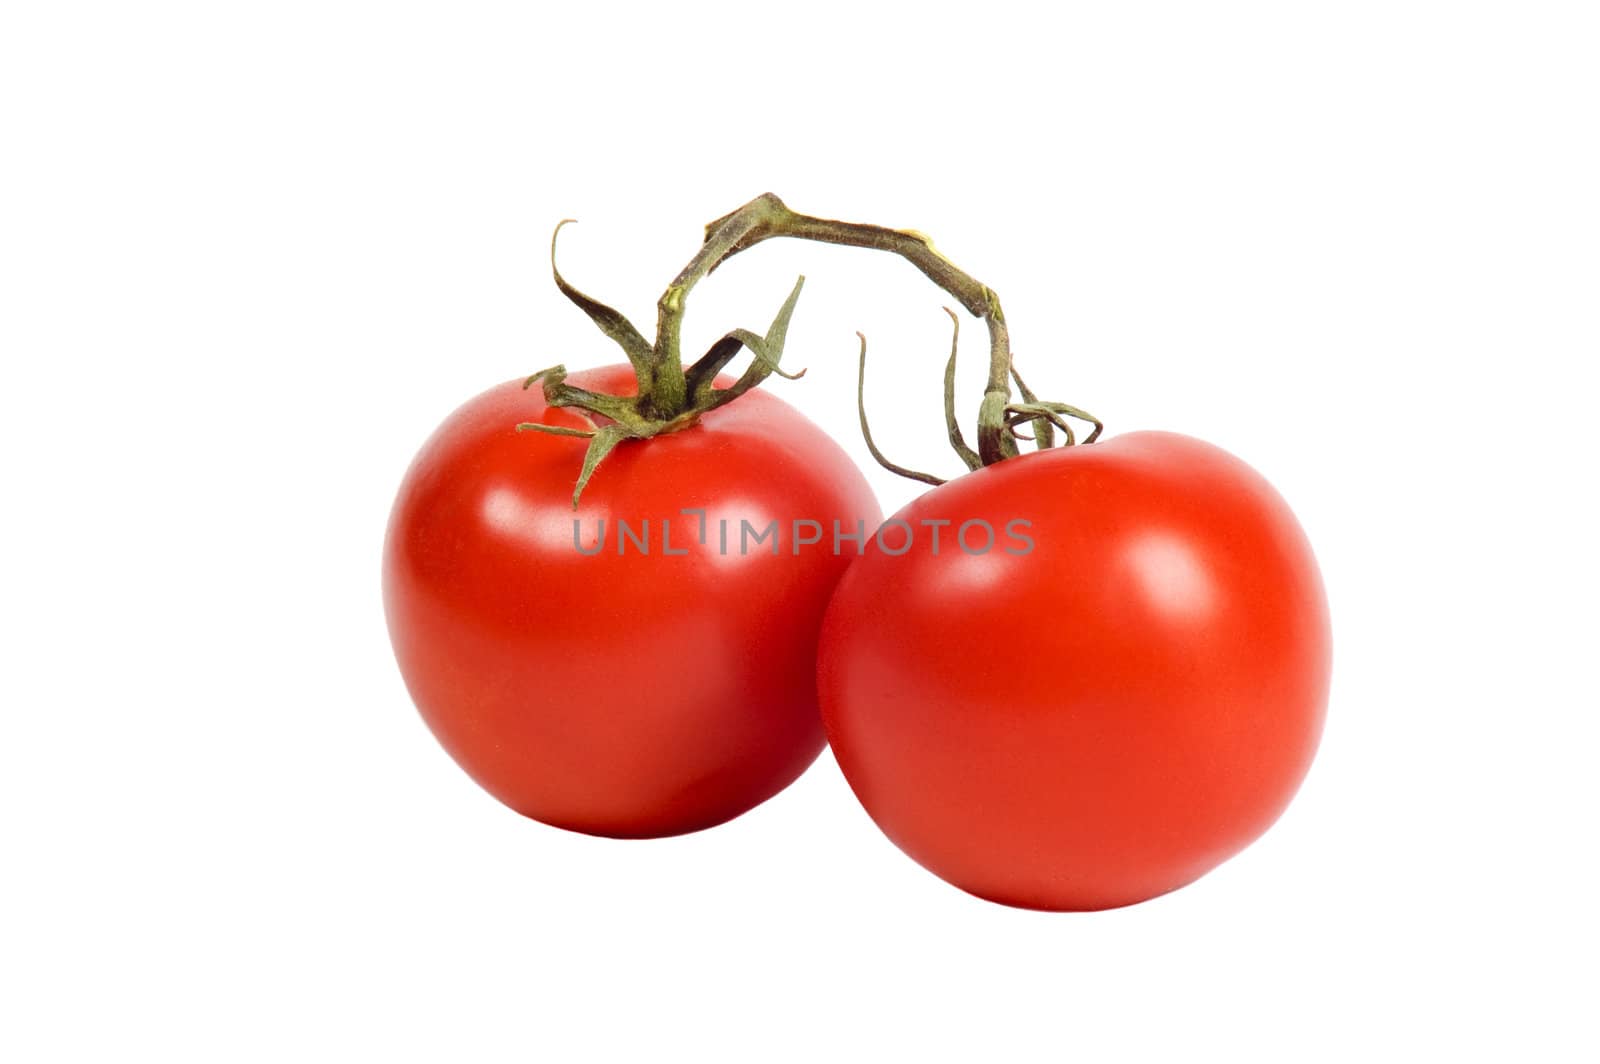 pair of nice ripe tomato's isolated on white